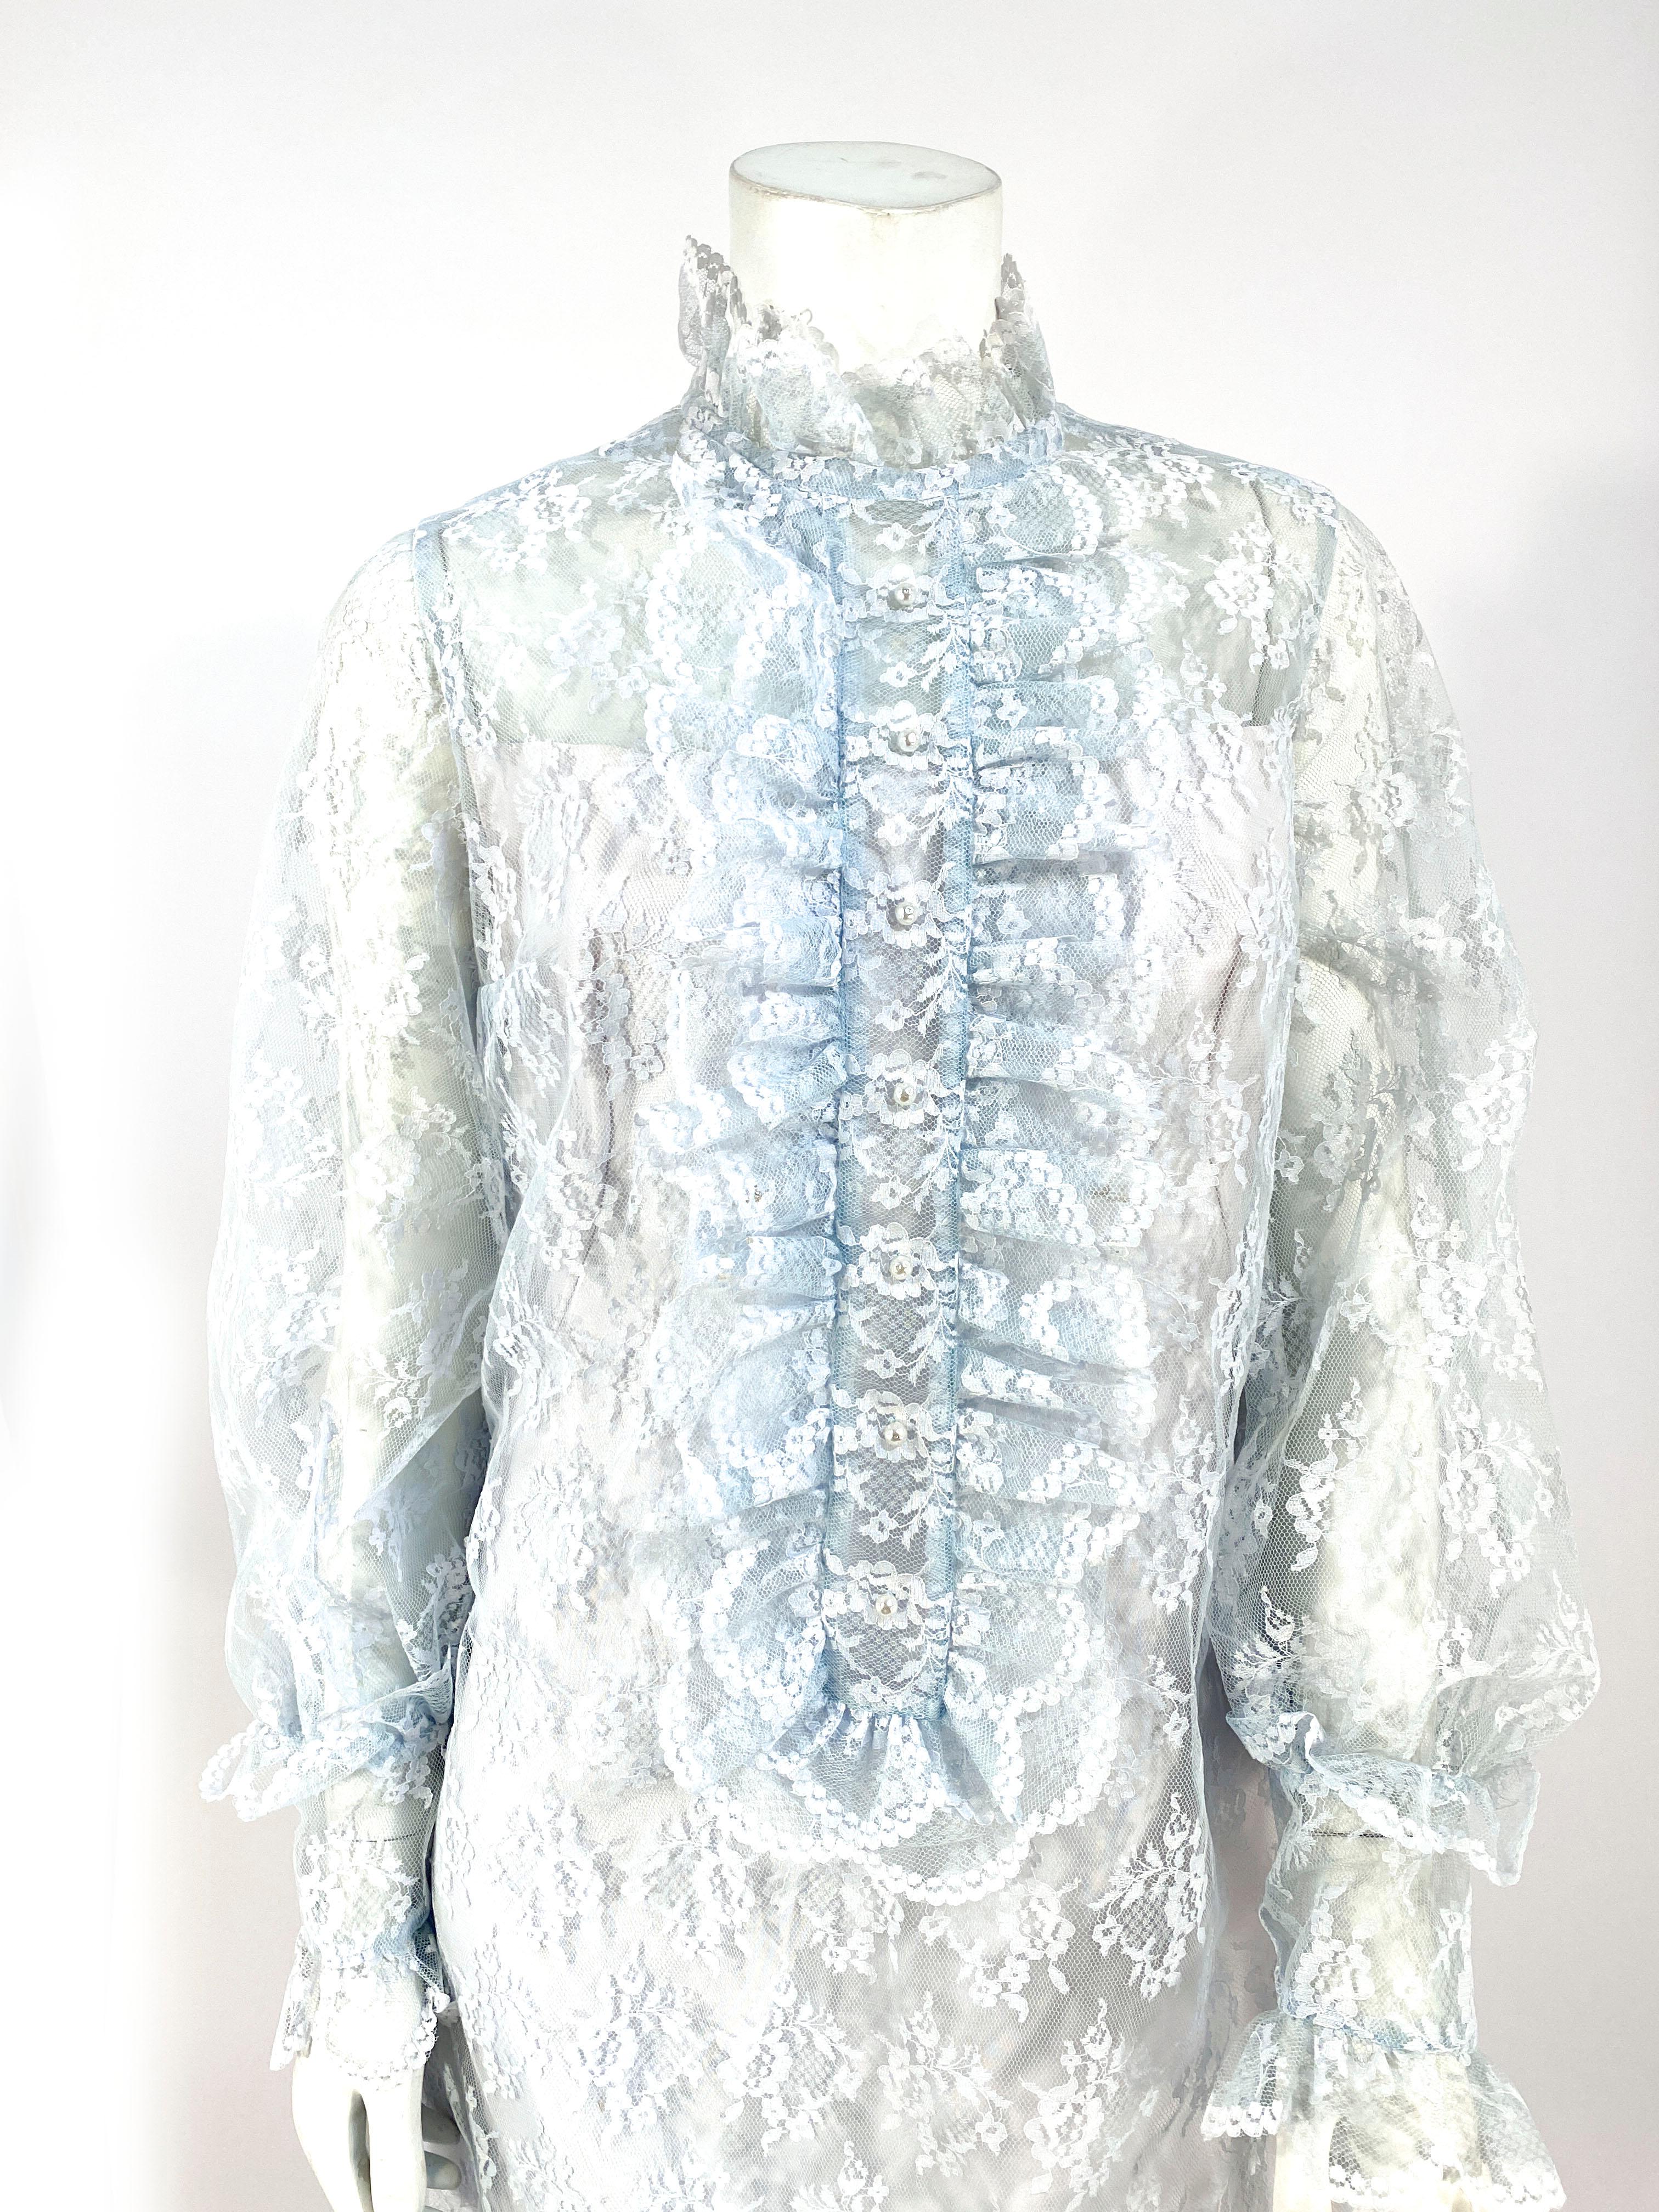 1960s Emma Domb shift dress made of a powder blue floral lace and a twill fitted lining. The face of the dress is decorated with an Edwardian-style attached jabot, high neck, and pearl buttons. The long sheer sleeves are finished with